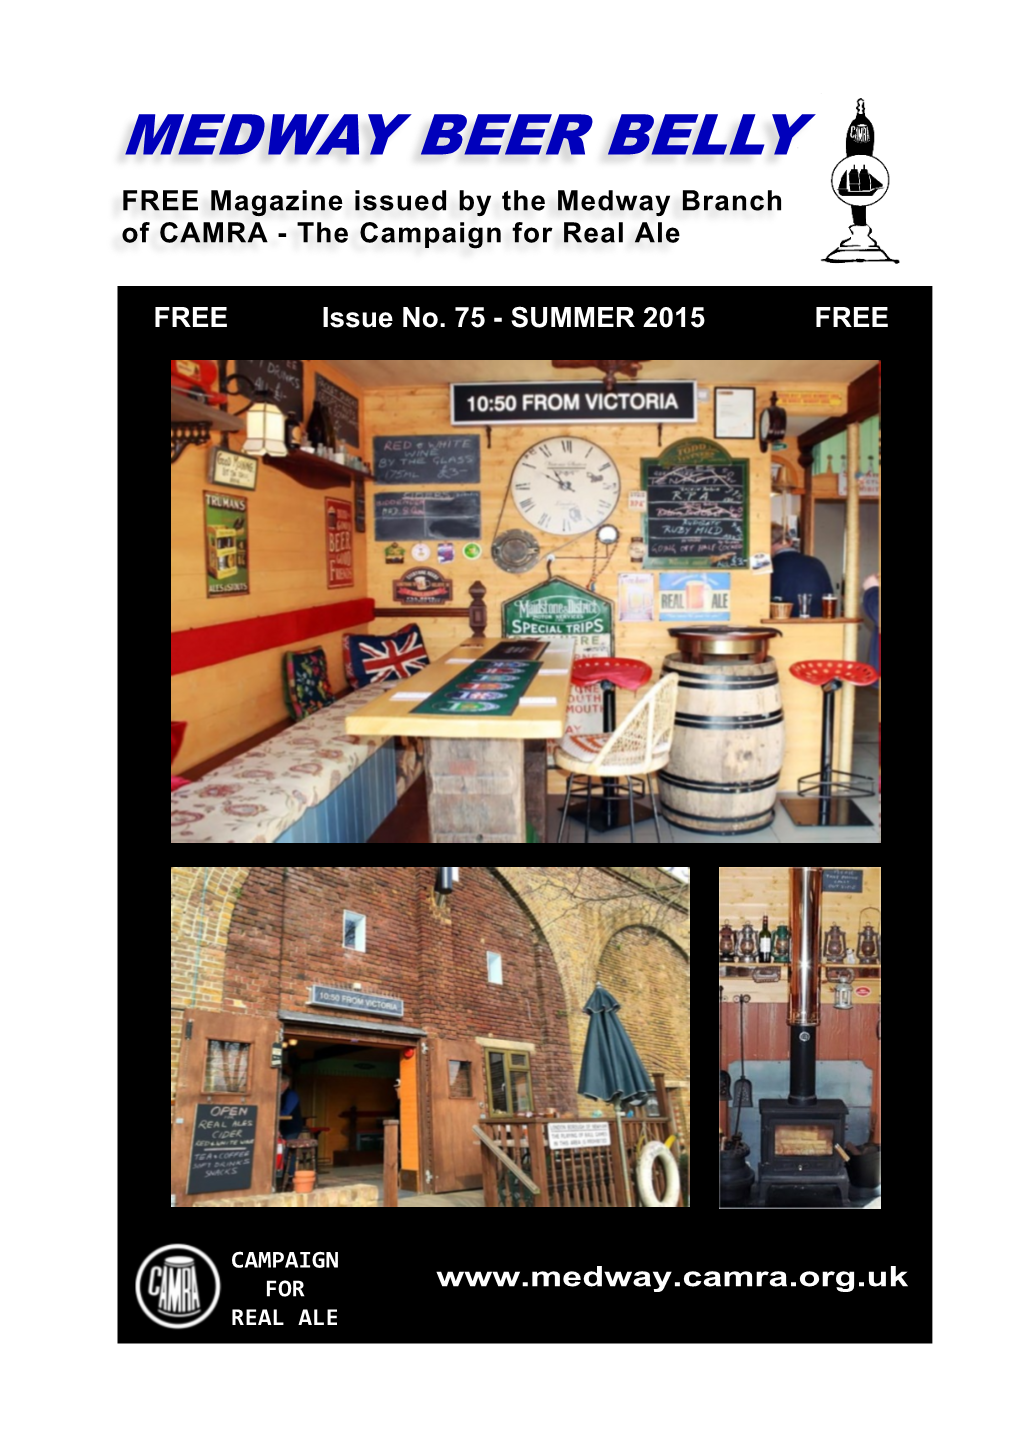 FREE Magazine Issued by the Medway Branch of CAMRA - the Campaign for Real Ale